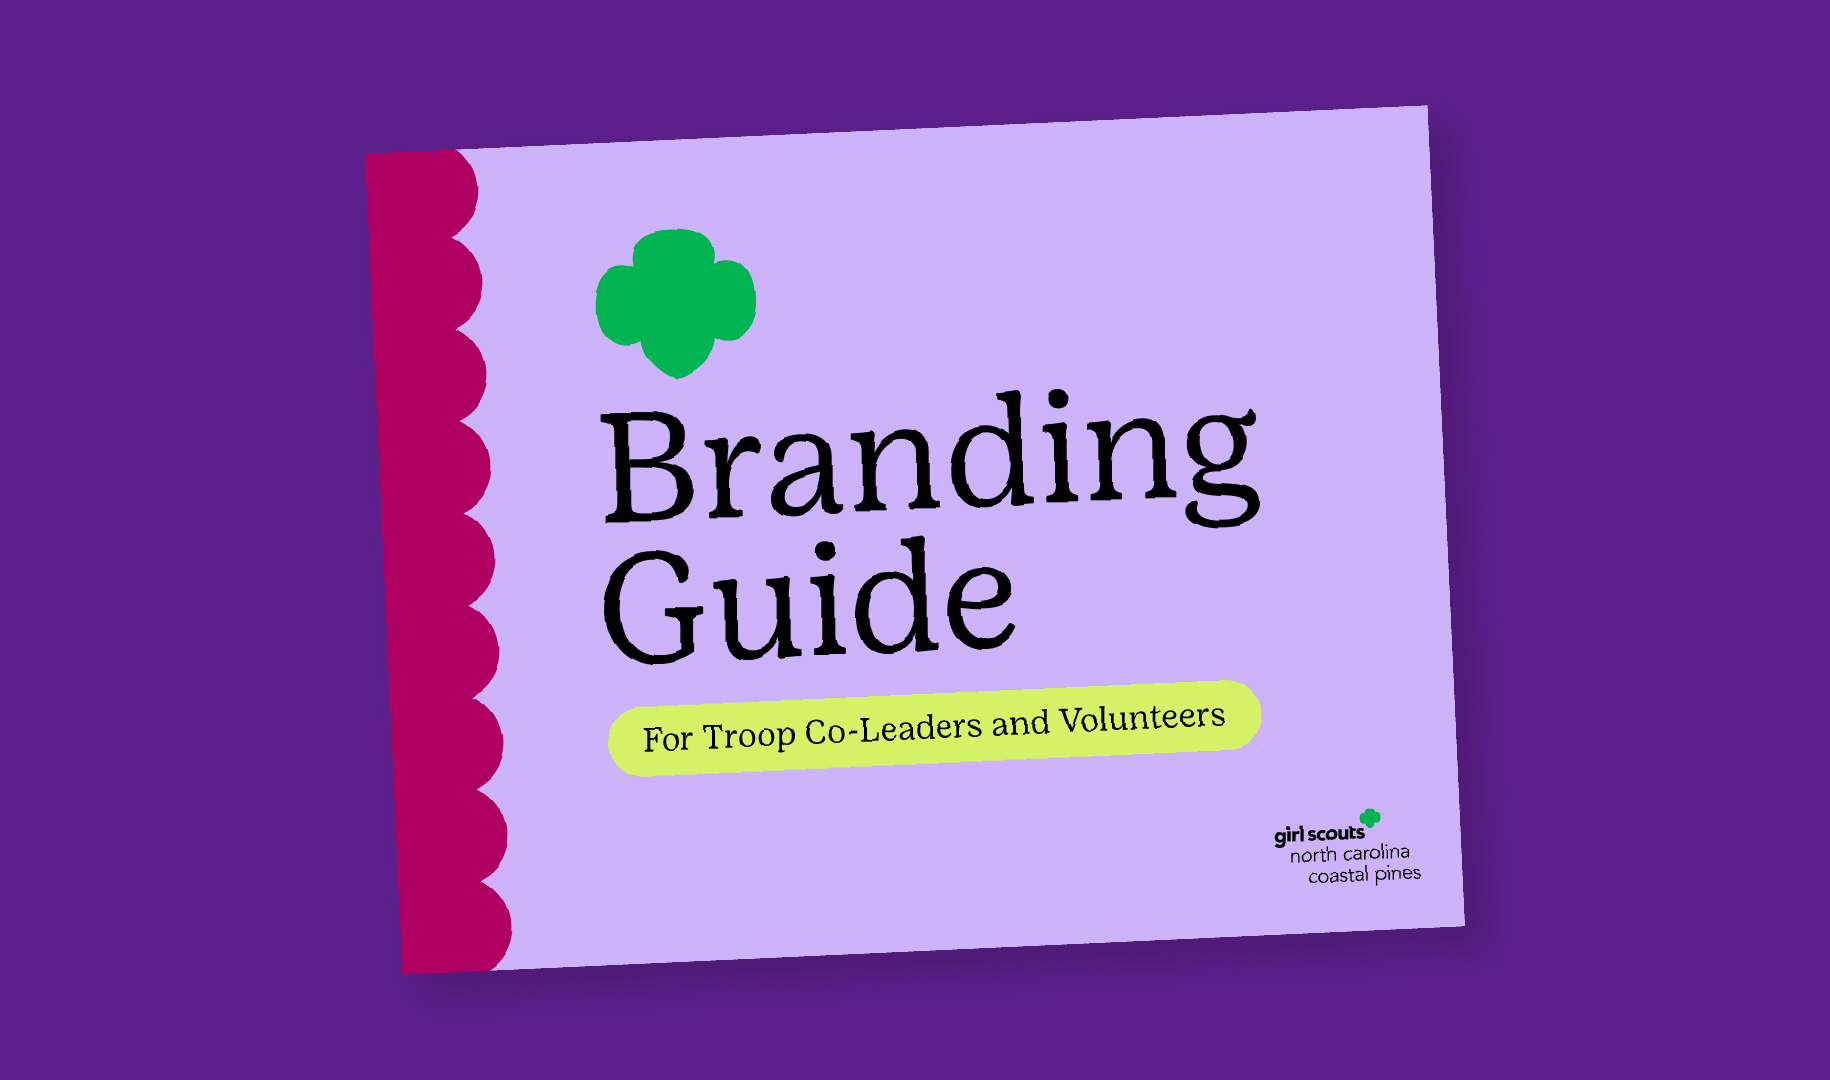 lilac branding guide cover on purple background